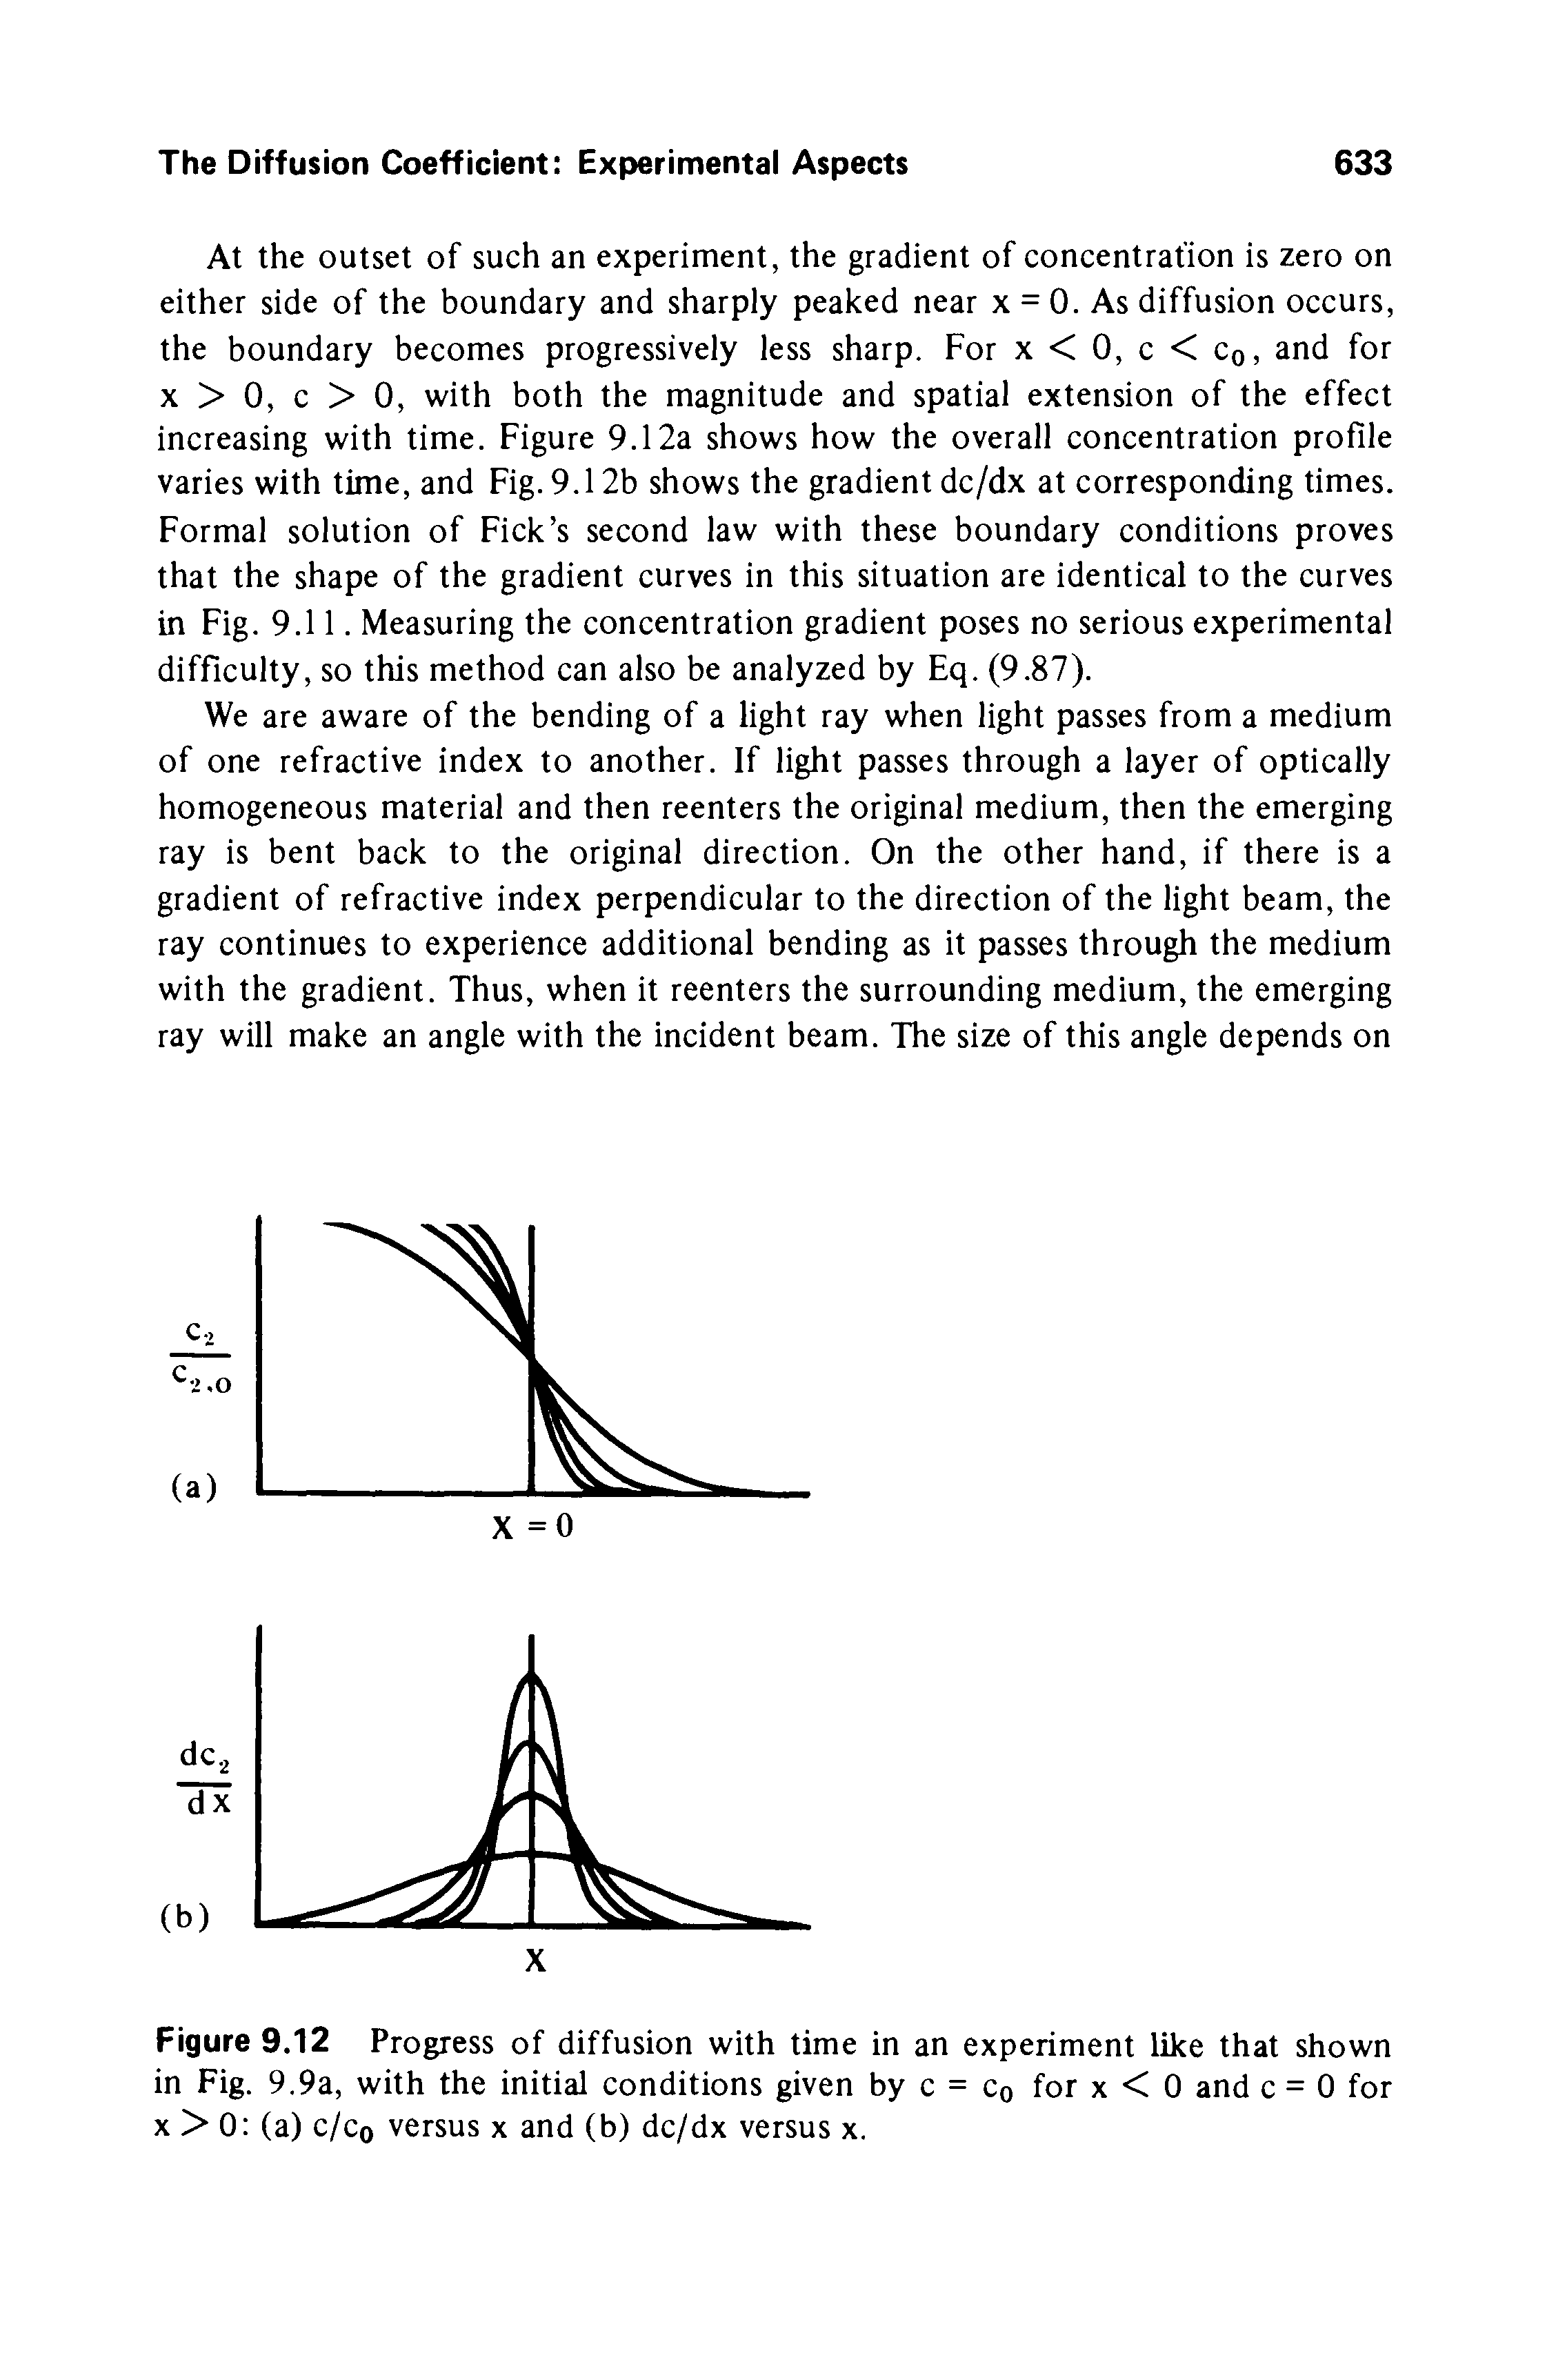 Figure 9.12 Progress of diffusion with time in an experiment like that shown in Fig. 9.9a, with the initial conditions given by c = Cq for x < 0 and c = 0 for x > 0 (a) c/co versus x and (b) dc/dx versus x.